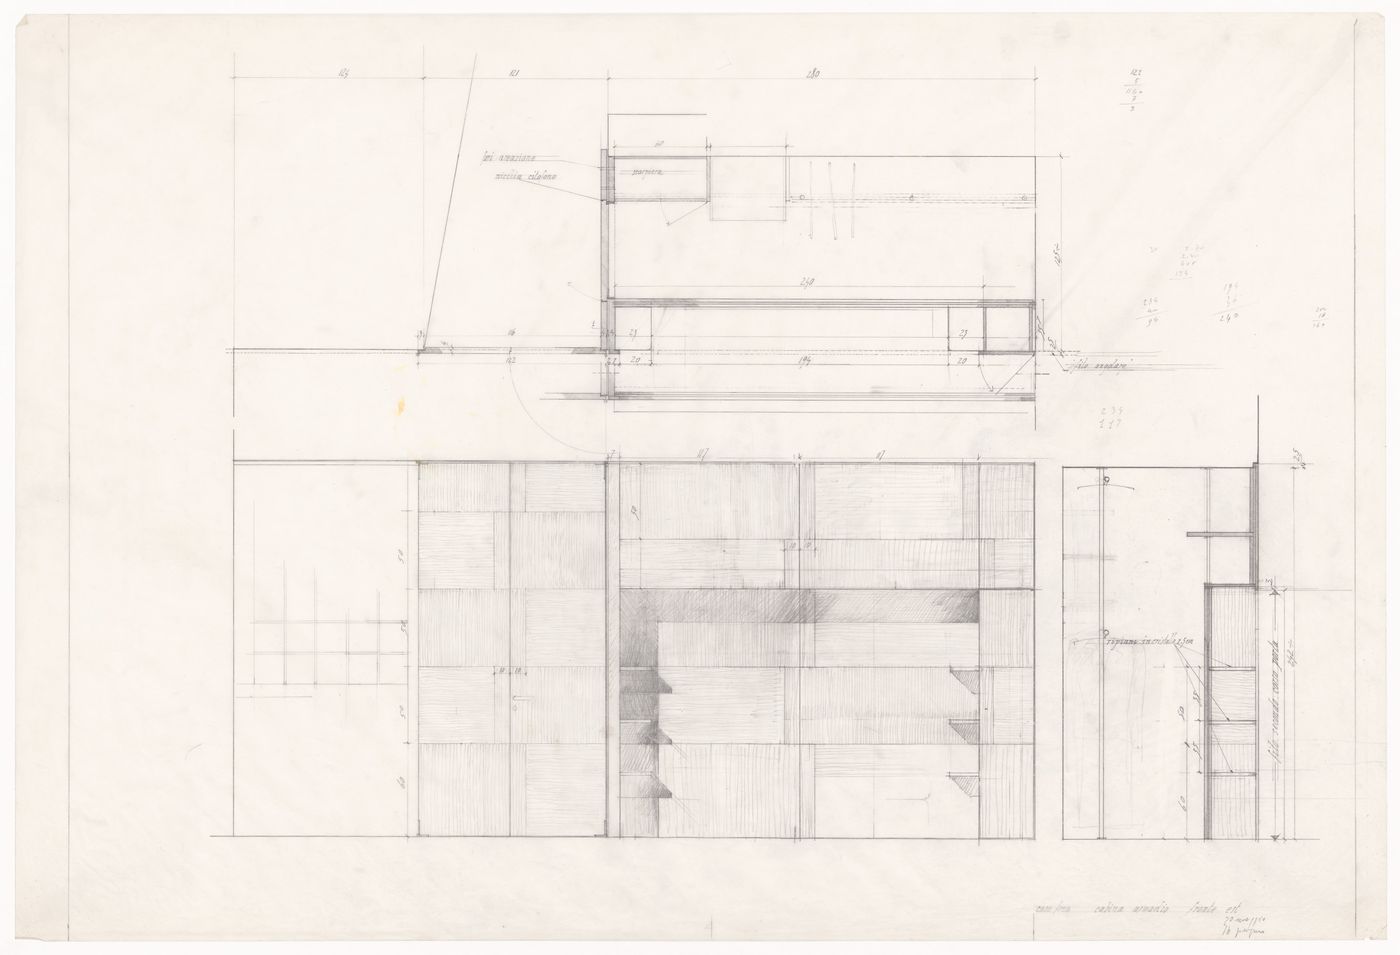 Plans and elevations for Casa Frea, Milan, Italy